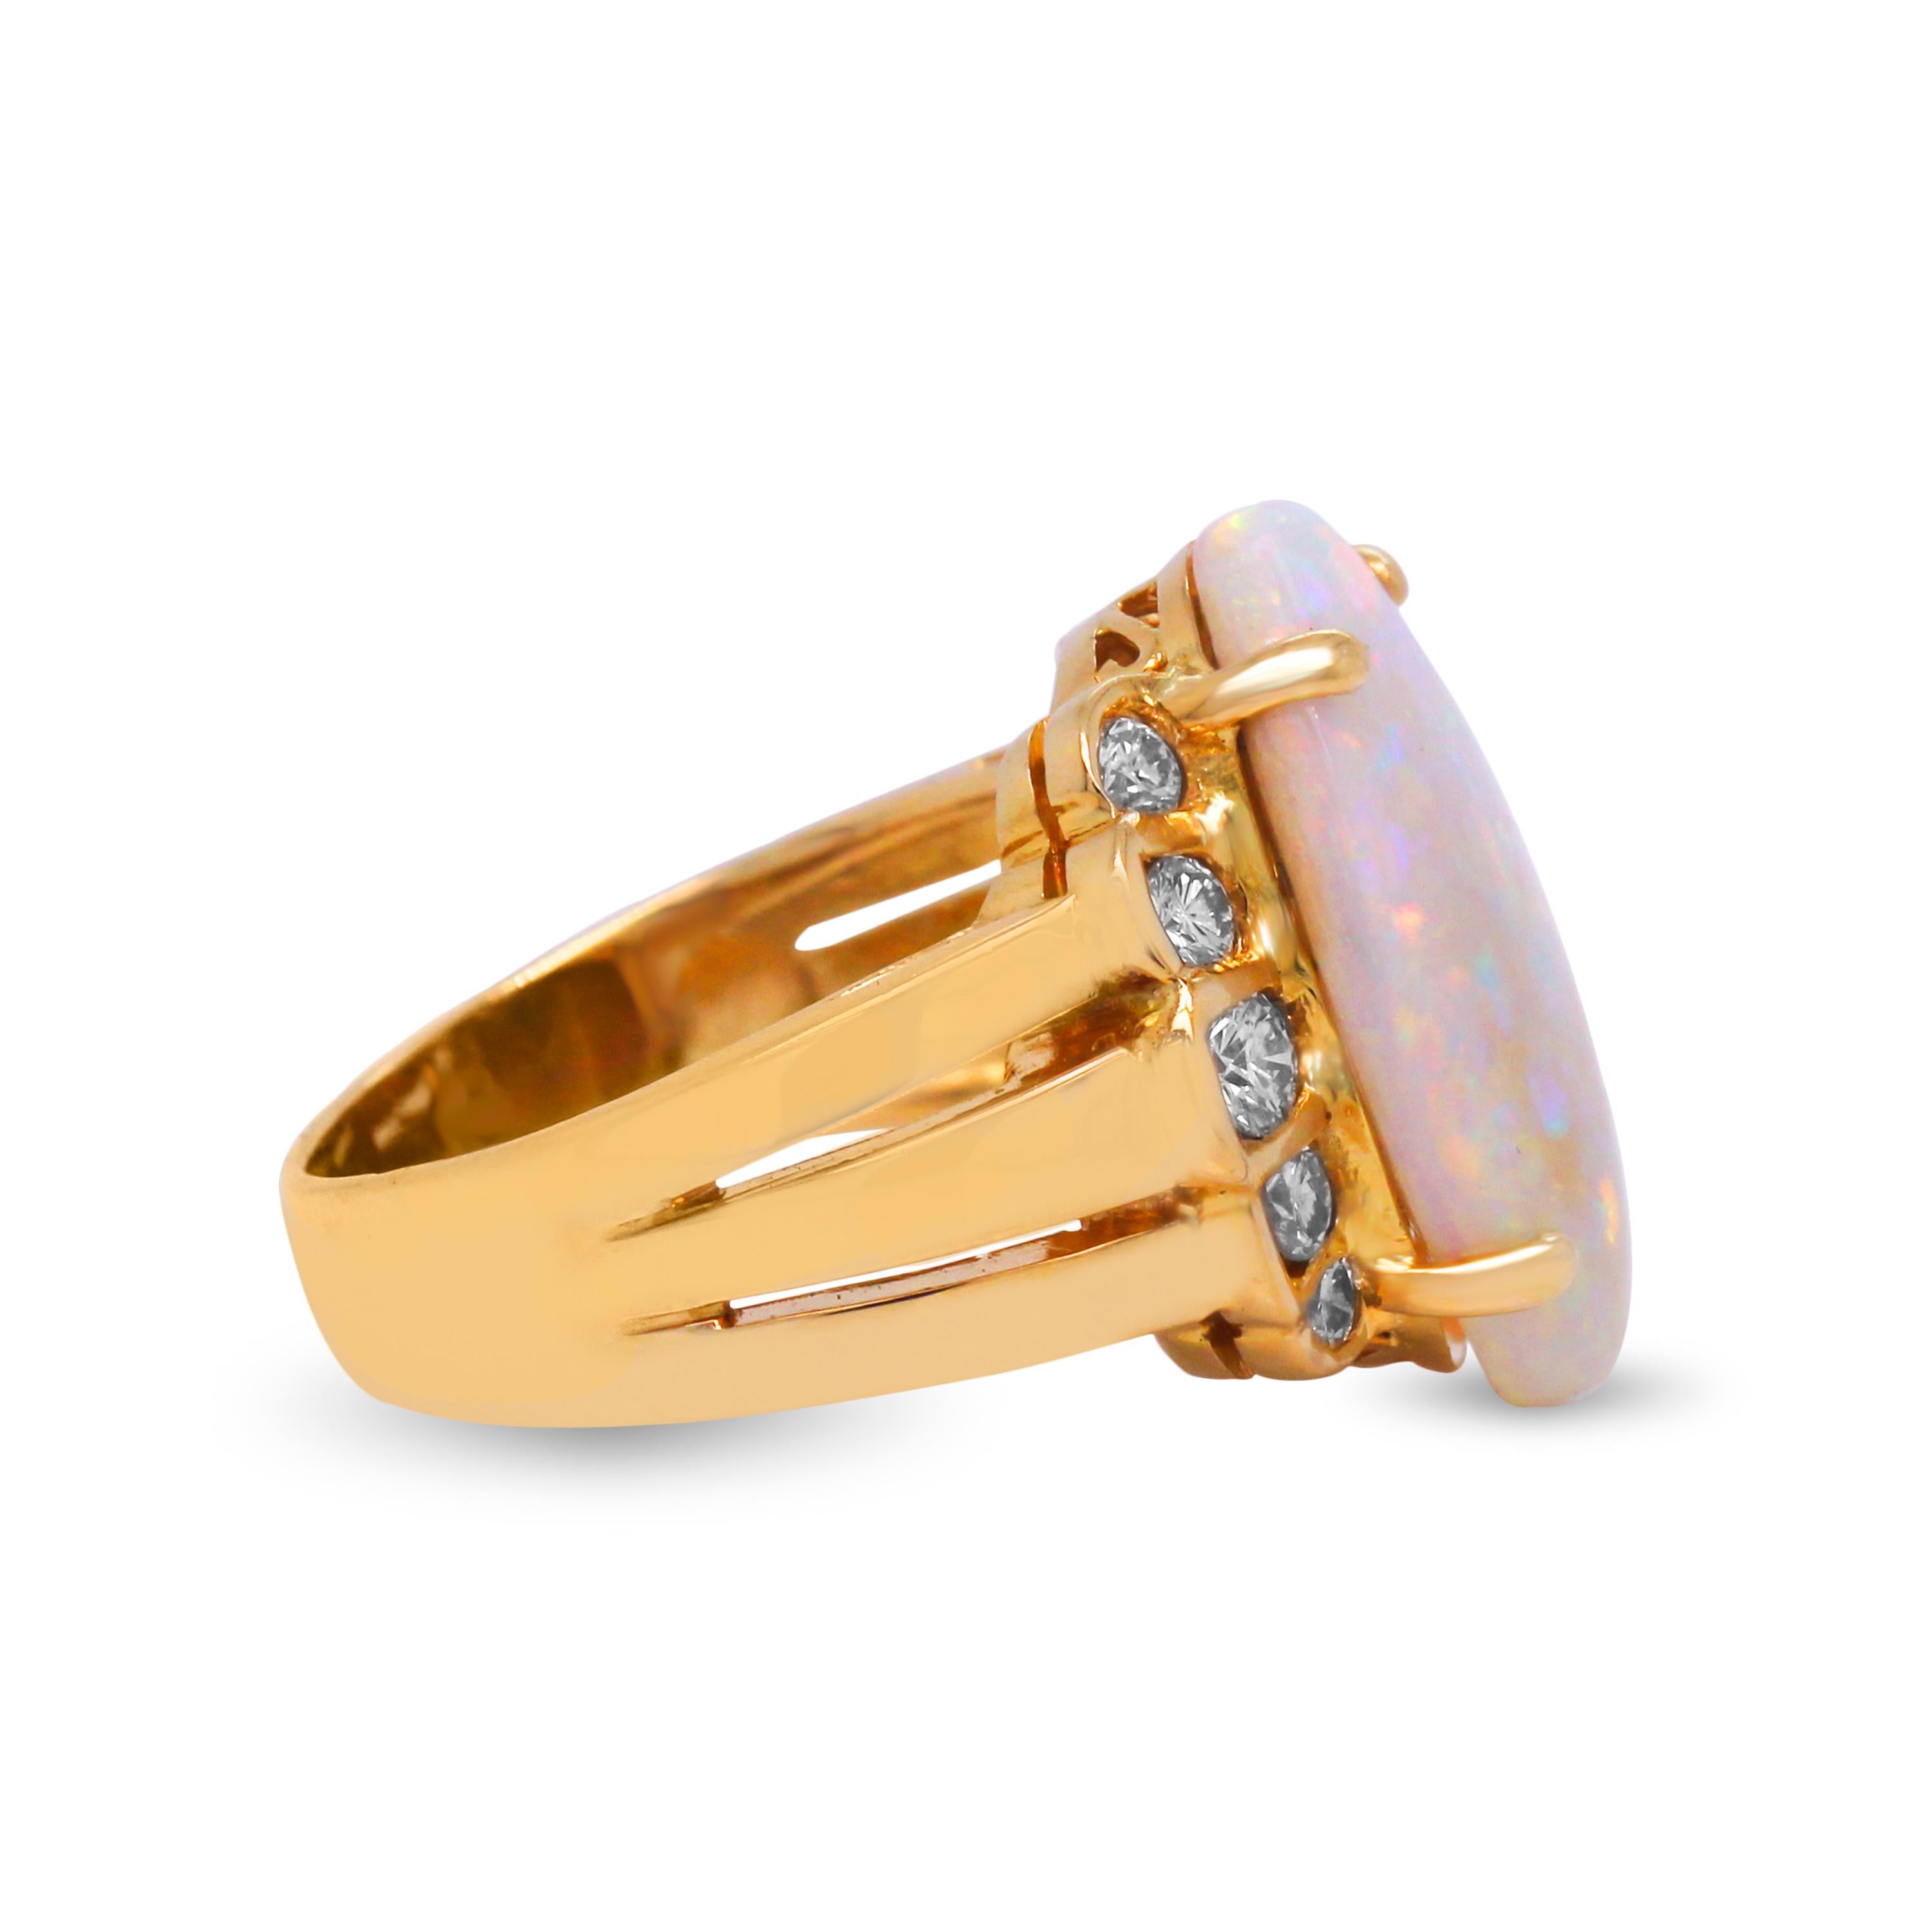 Contemporary Yellow Gold and Diamond Cocktail Ring with Oval Ethiopian Opal Center